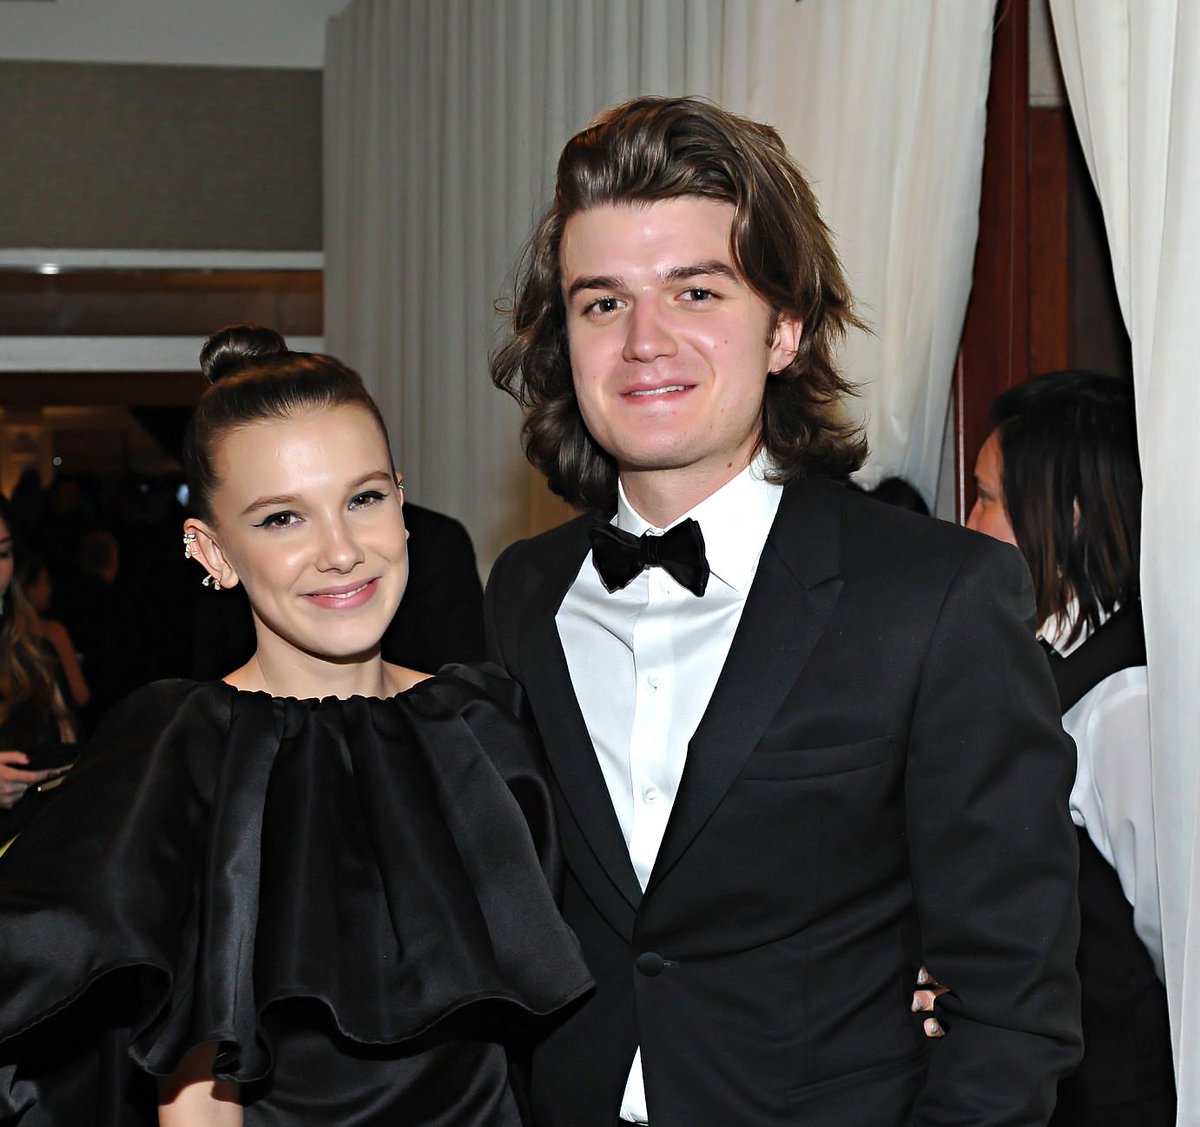 RT @bestofjoes: Joe Keery with Millie Bobby Brown and Gaten Matarazzo at the 2018 Golden Globes post-party https://t.co/WXu33AAPoc